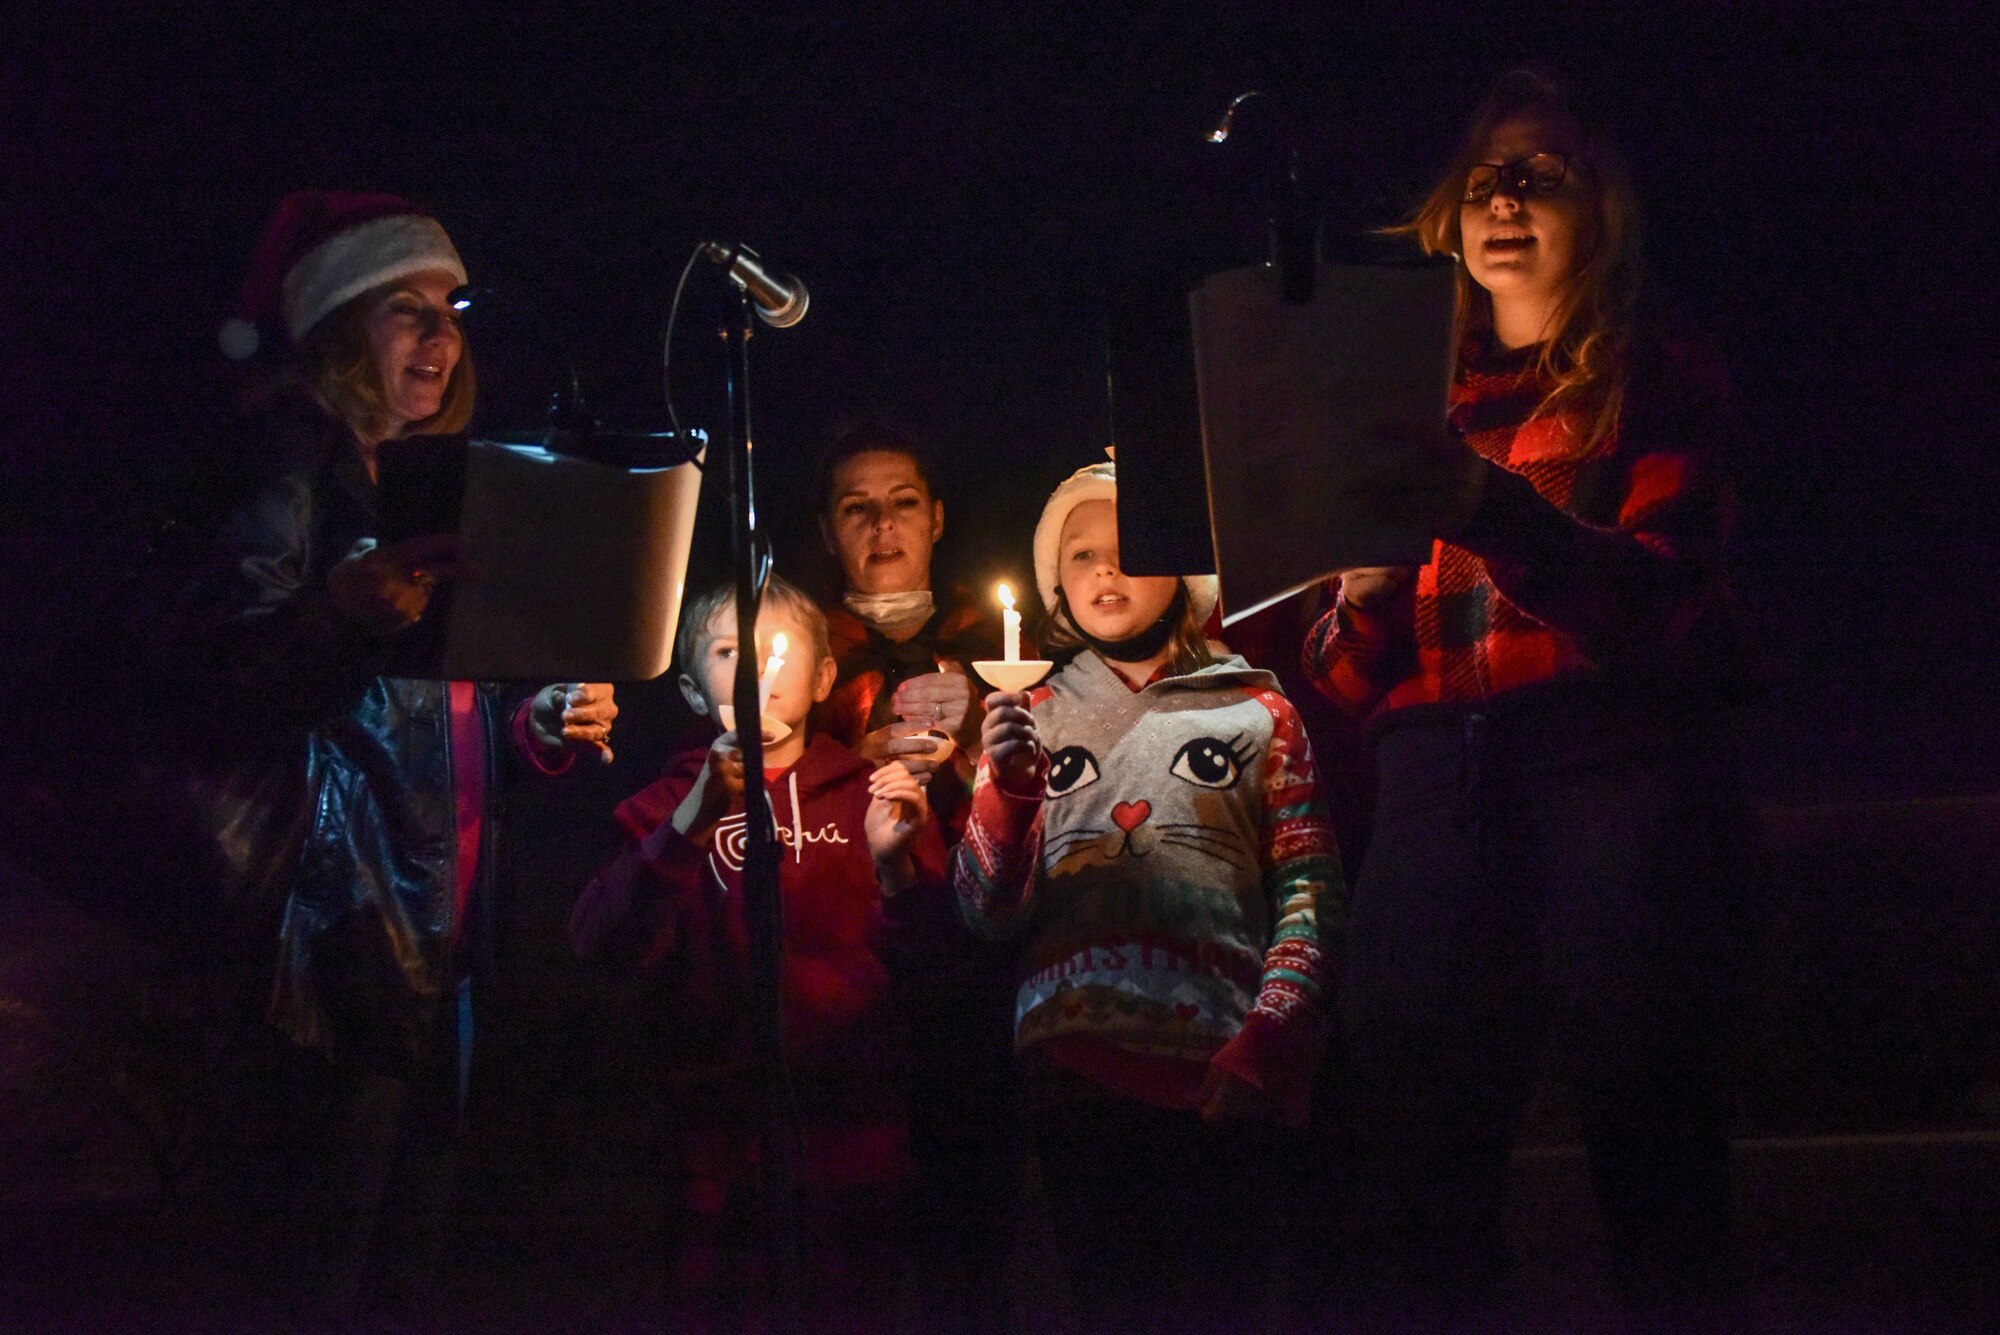 A picture of holiday carolers singing.